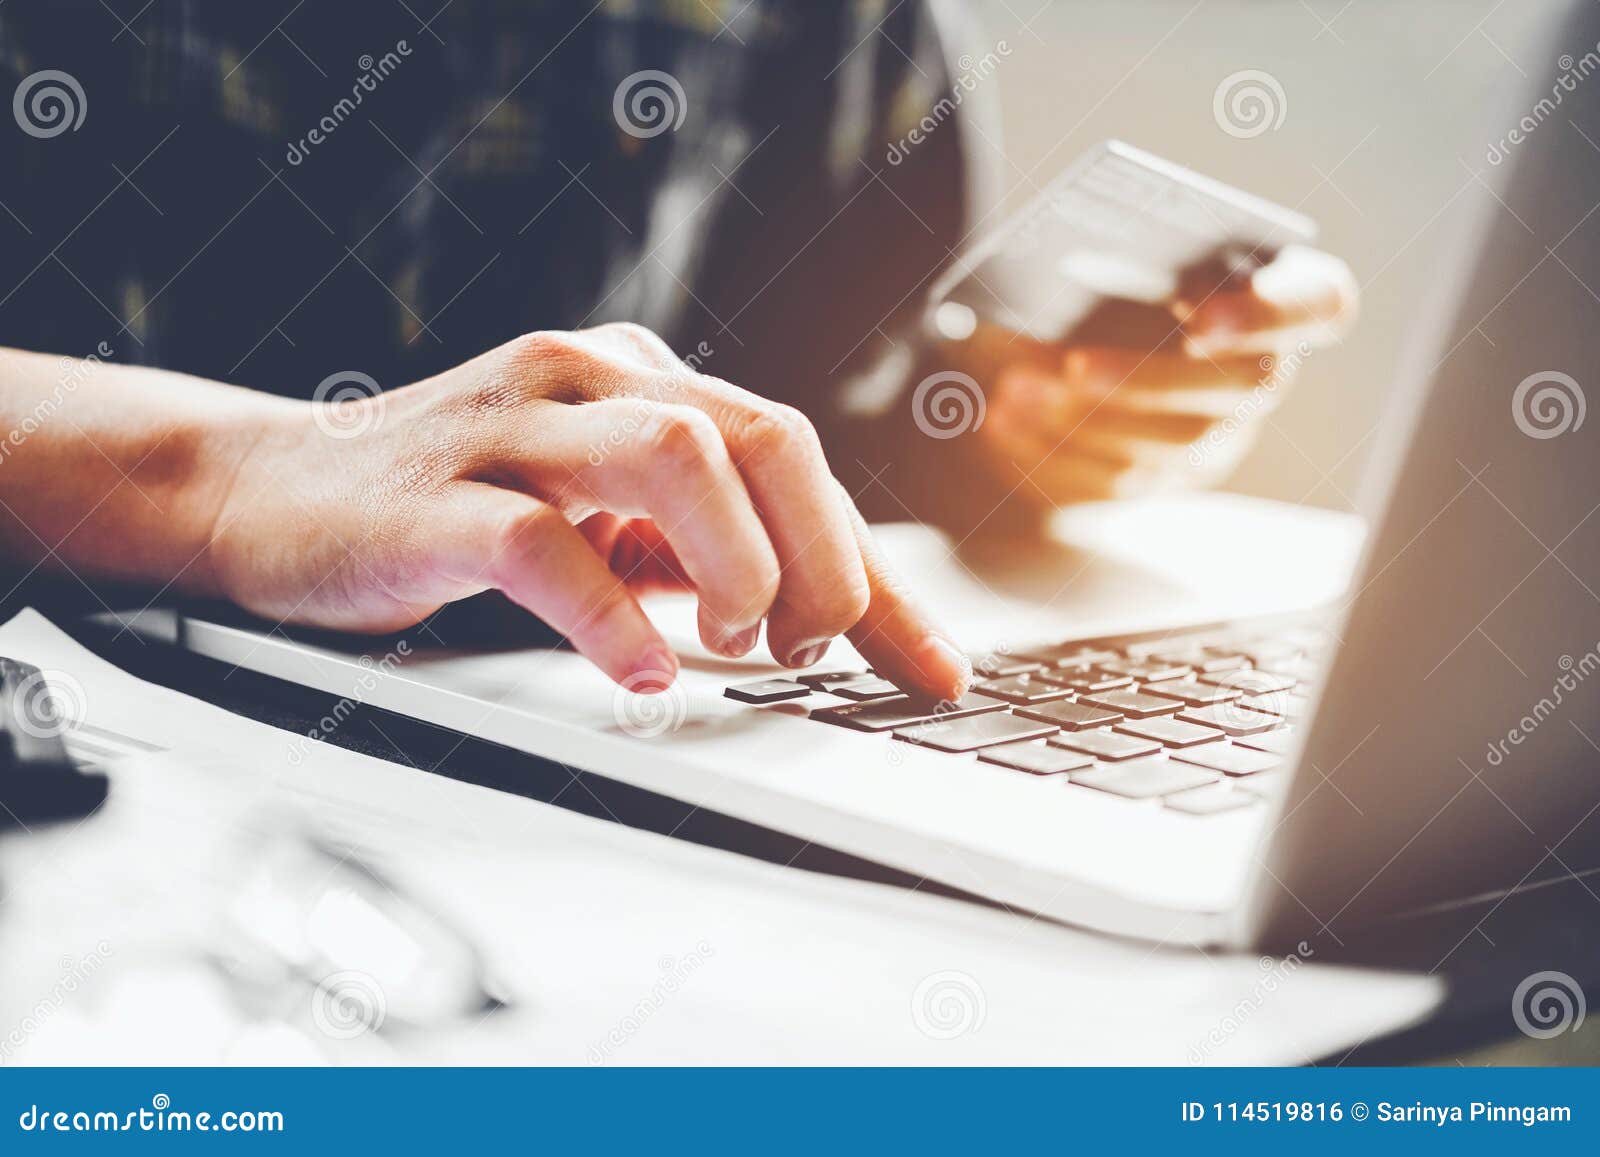 man`s hands typing laptop keyboard and holding credit card onlin